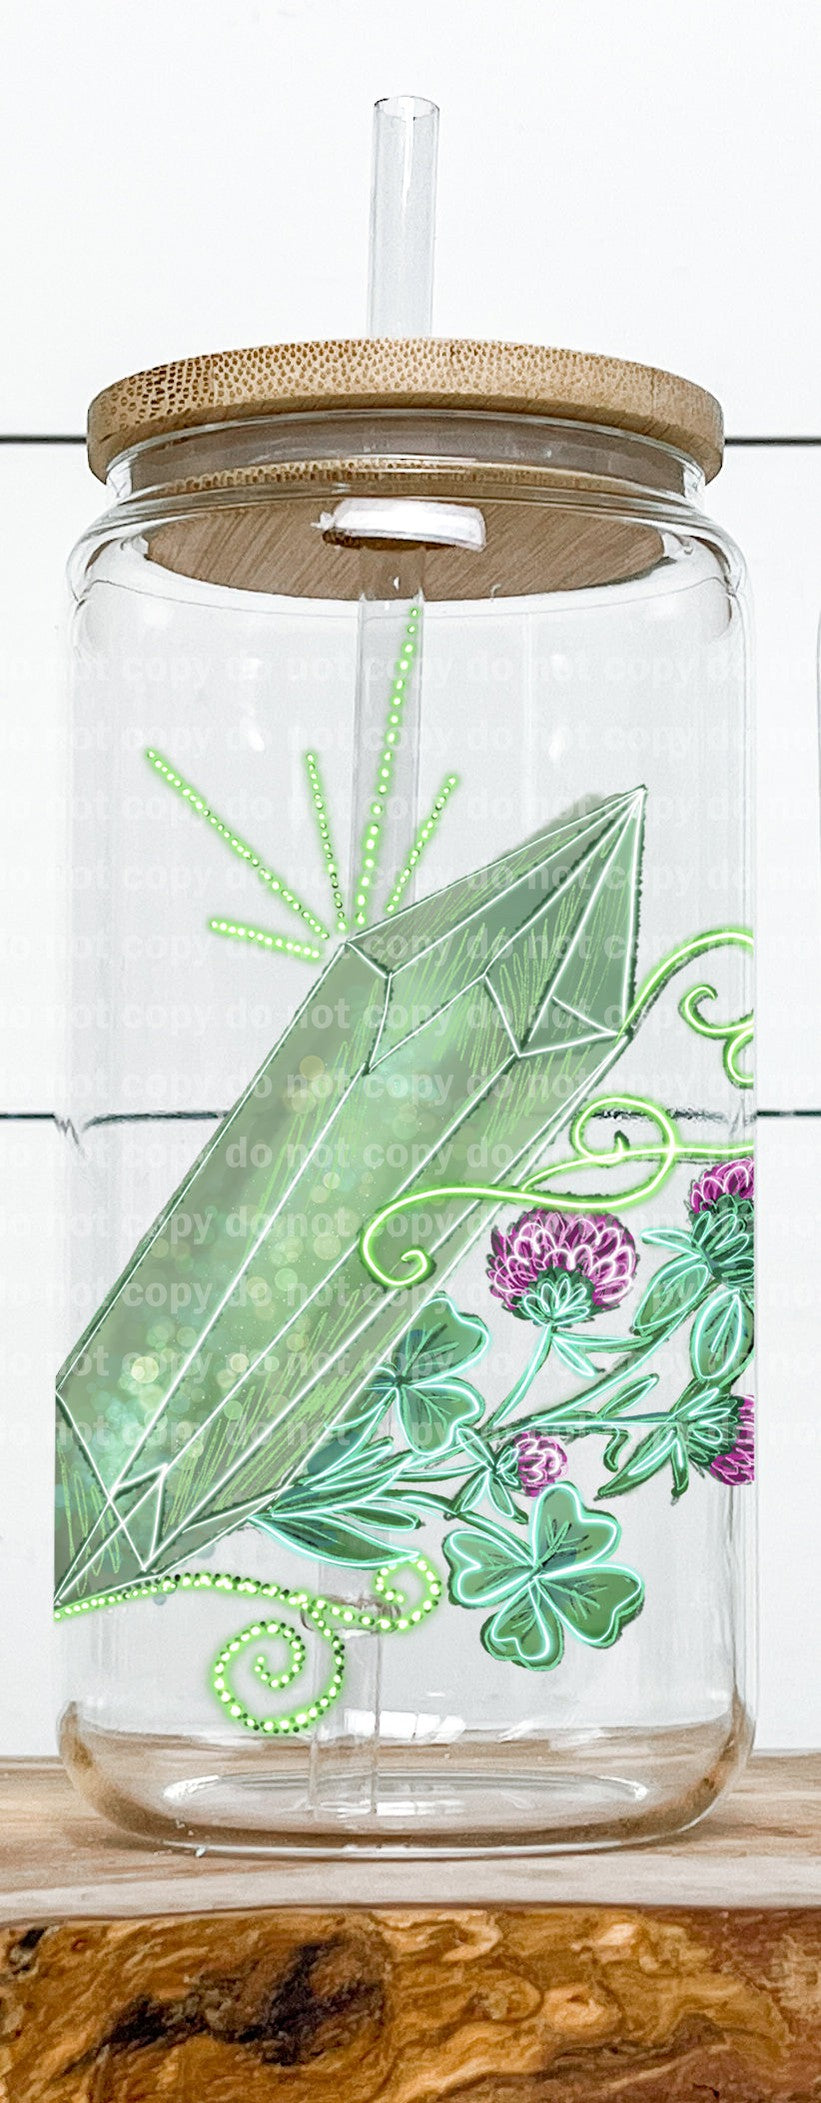 Crystal Floral Green Decal 3.2 x 4.5